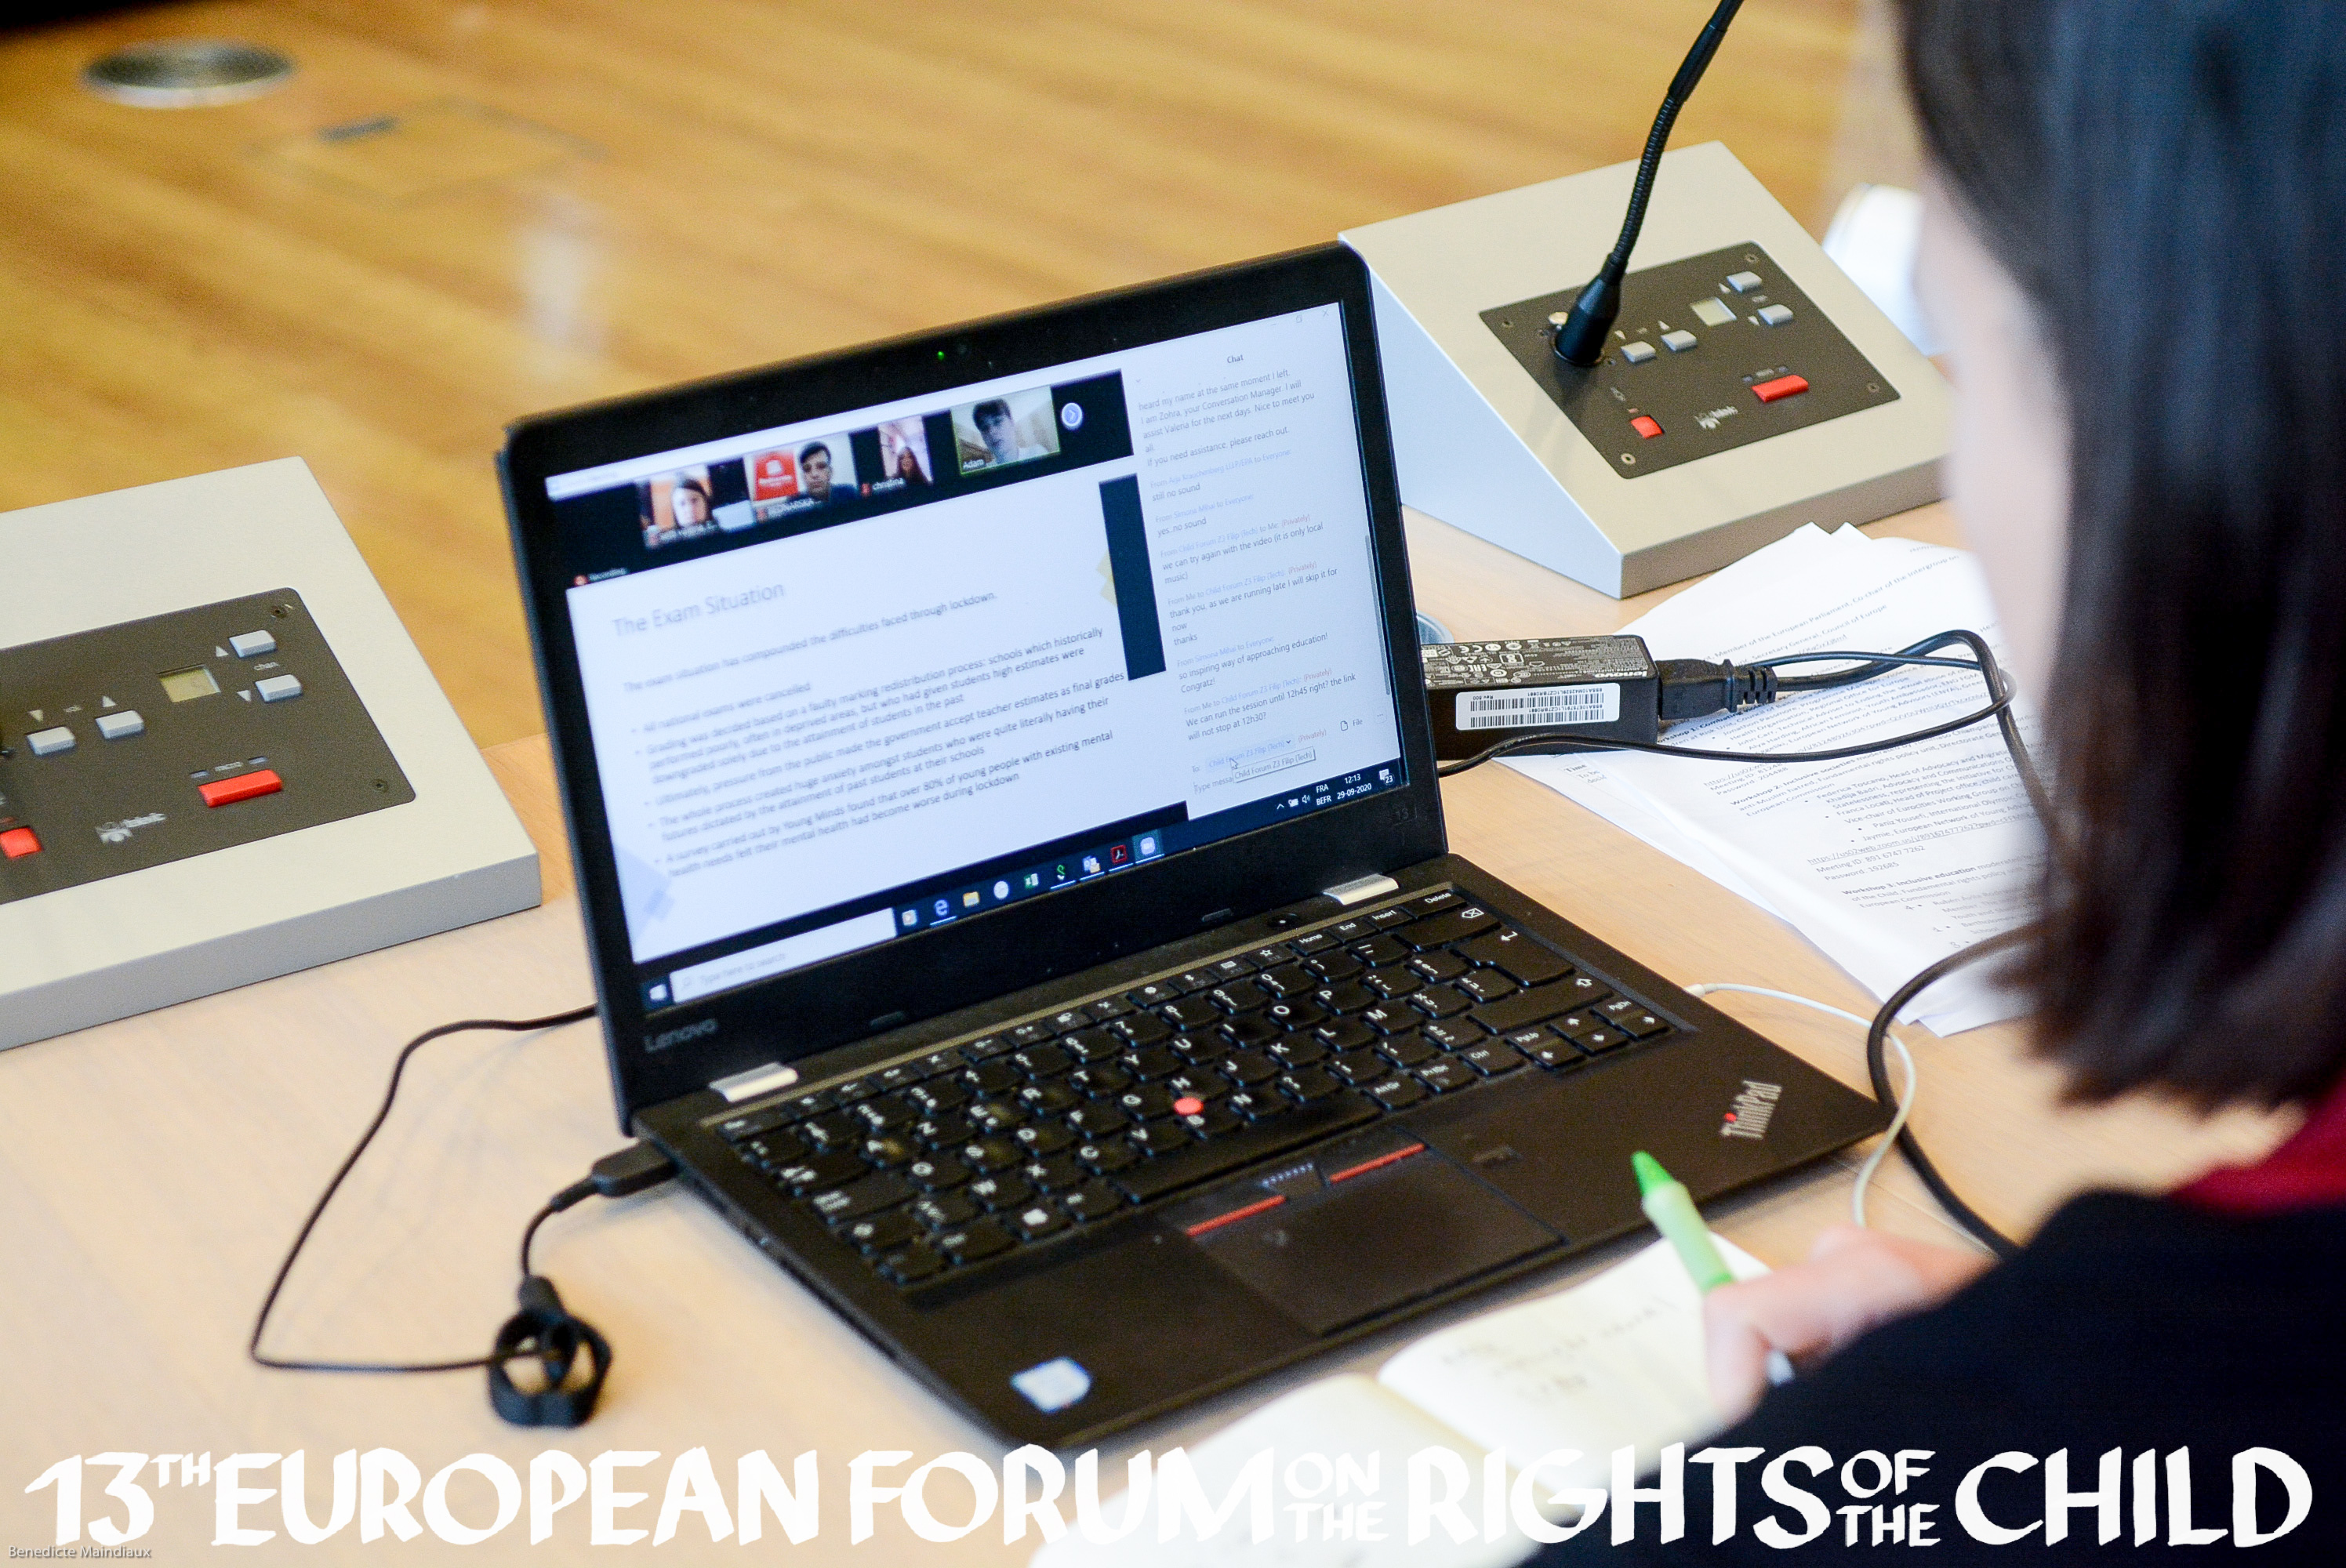 13th European Forum on the Rights of the Child